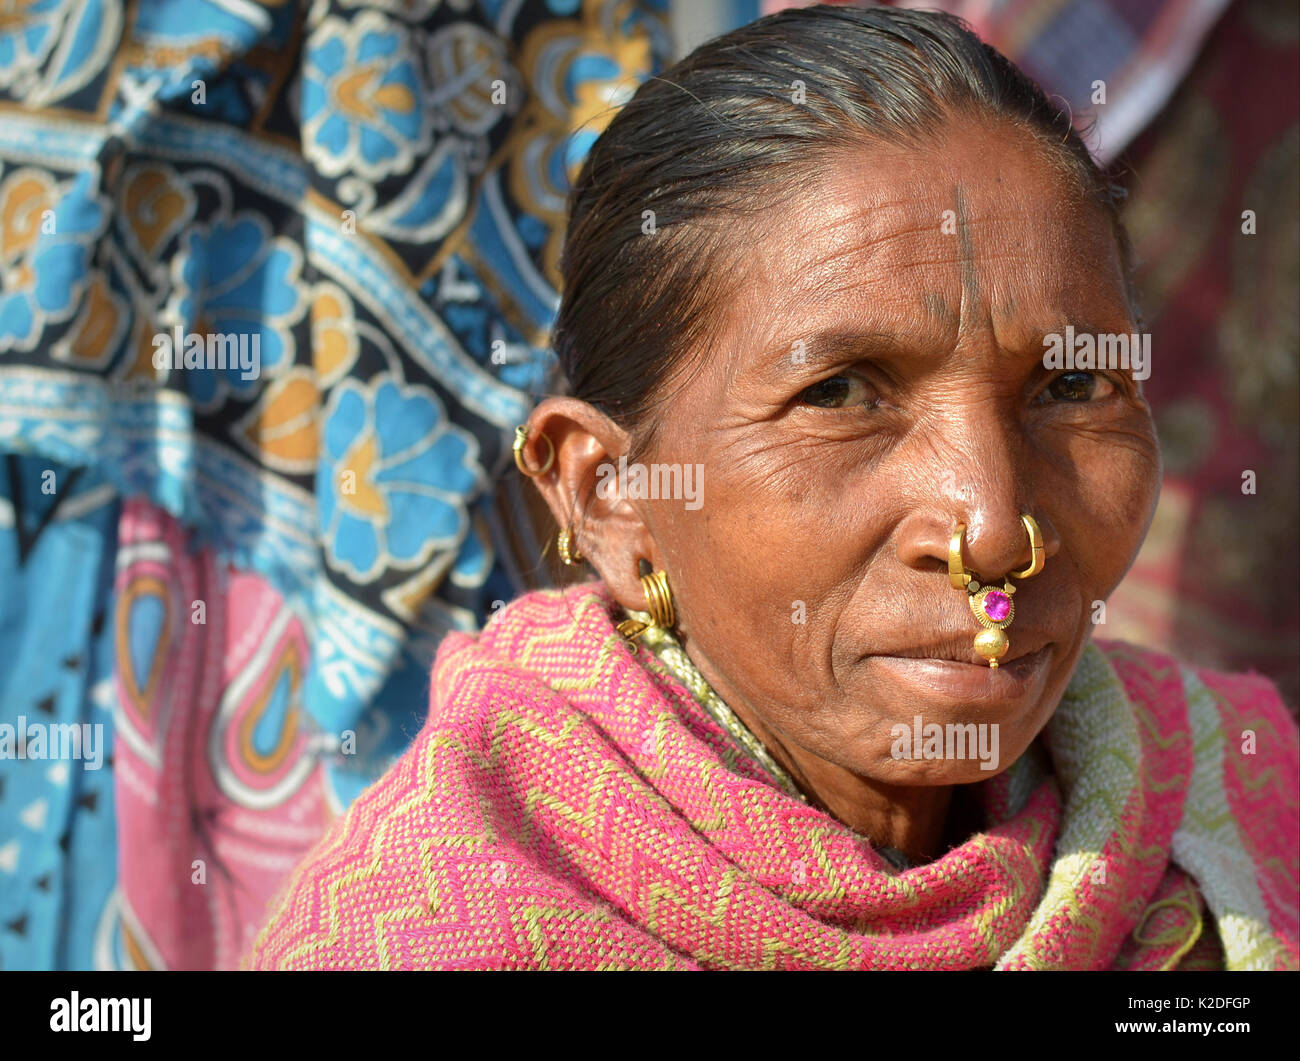 Indian Adivasi woman (Desia Kondh tribe, Kuvi Kondh tribe) with gold-and-gemstone tribal nose jewellery and golden earrings smiles for the camera. Stock Photo